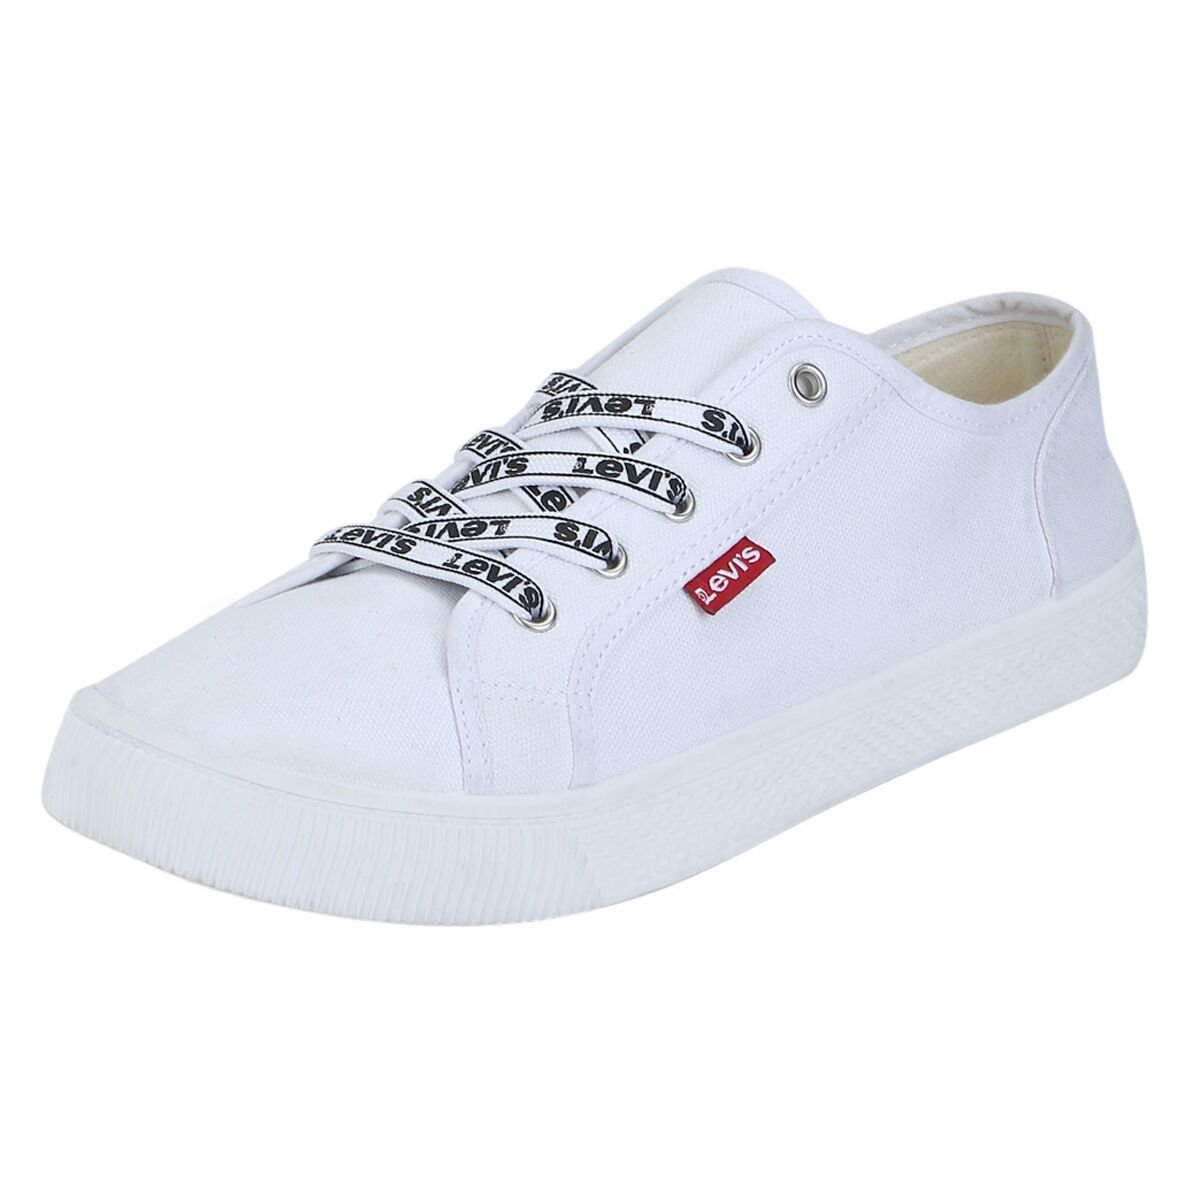 Buy Levi's Women Ls1 Low S Red Sneakers online-tuongthan.vn